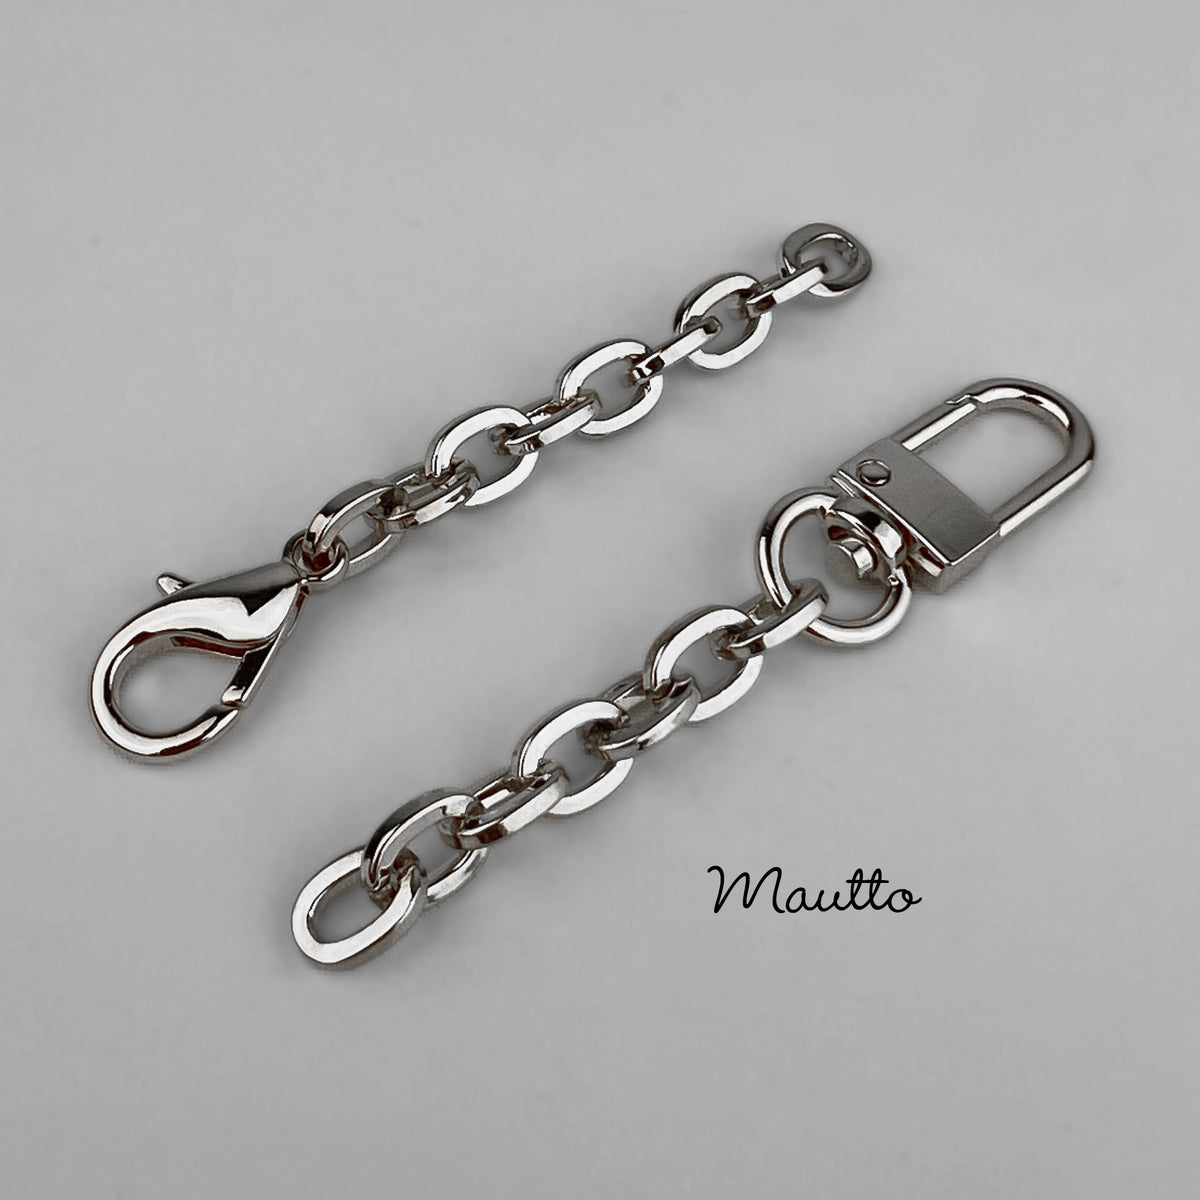 Chain Strap Extender Accessory for Louis Vuitton Bags & More -  UK